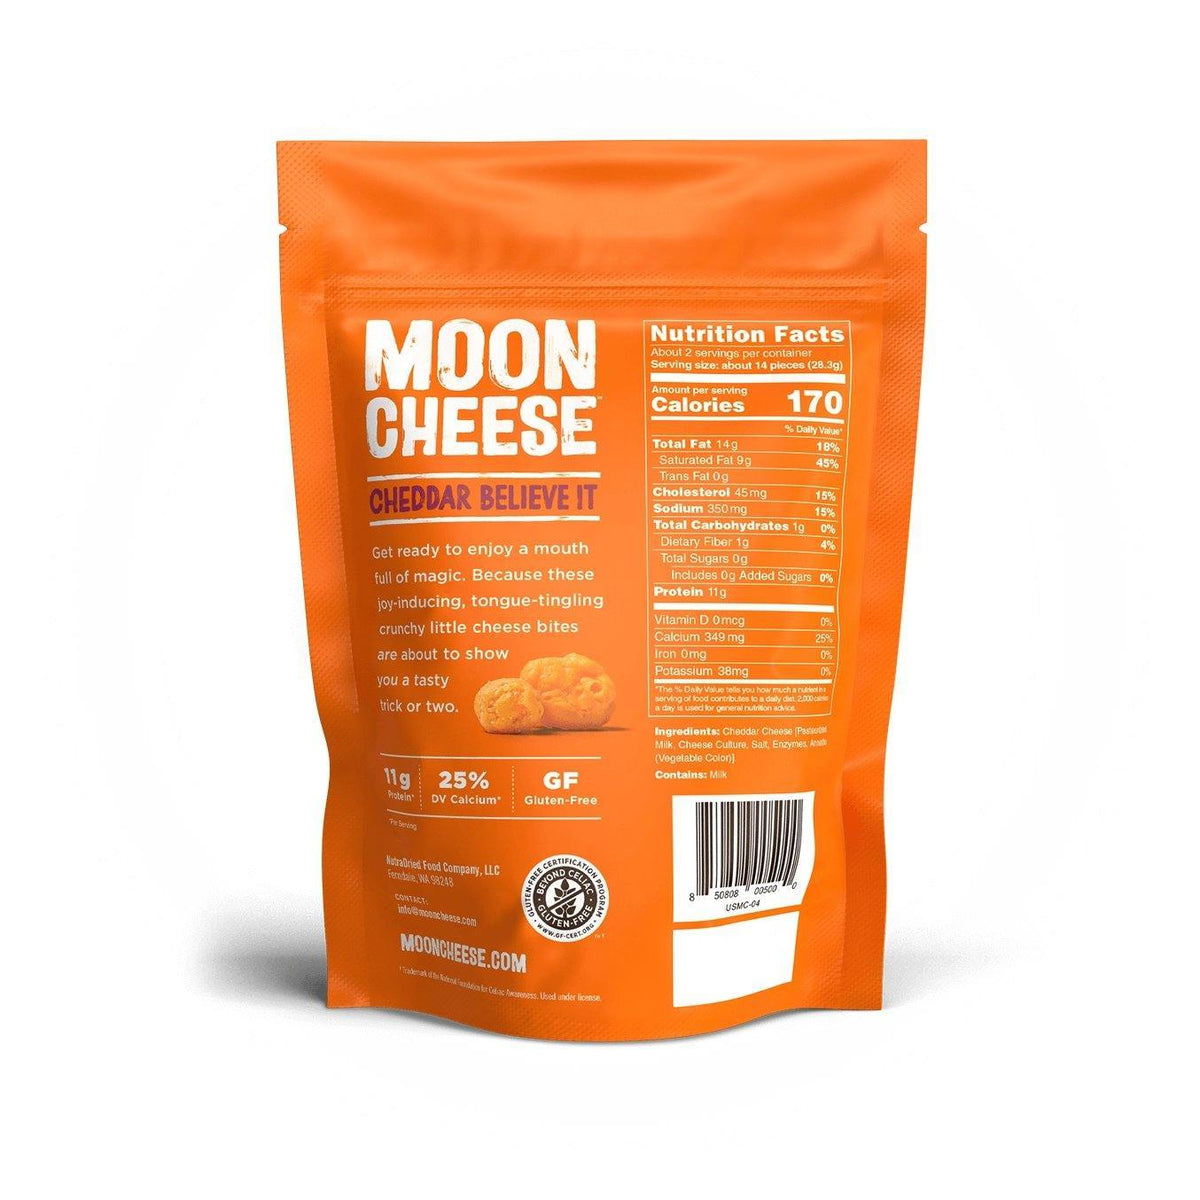 [Moon Cheese] Cheddar Believe It I 1oz or 2 oz bags exclusive at